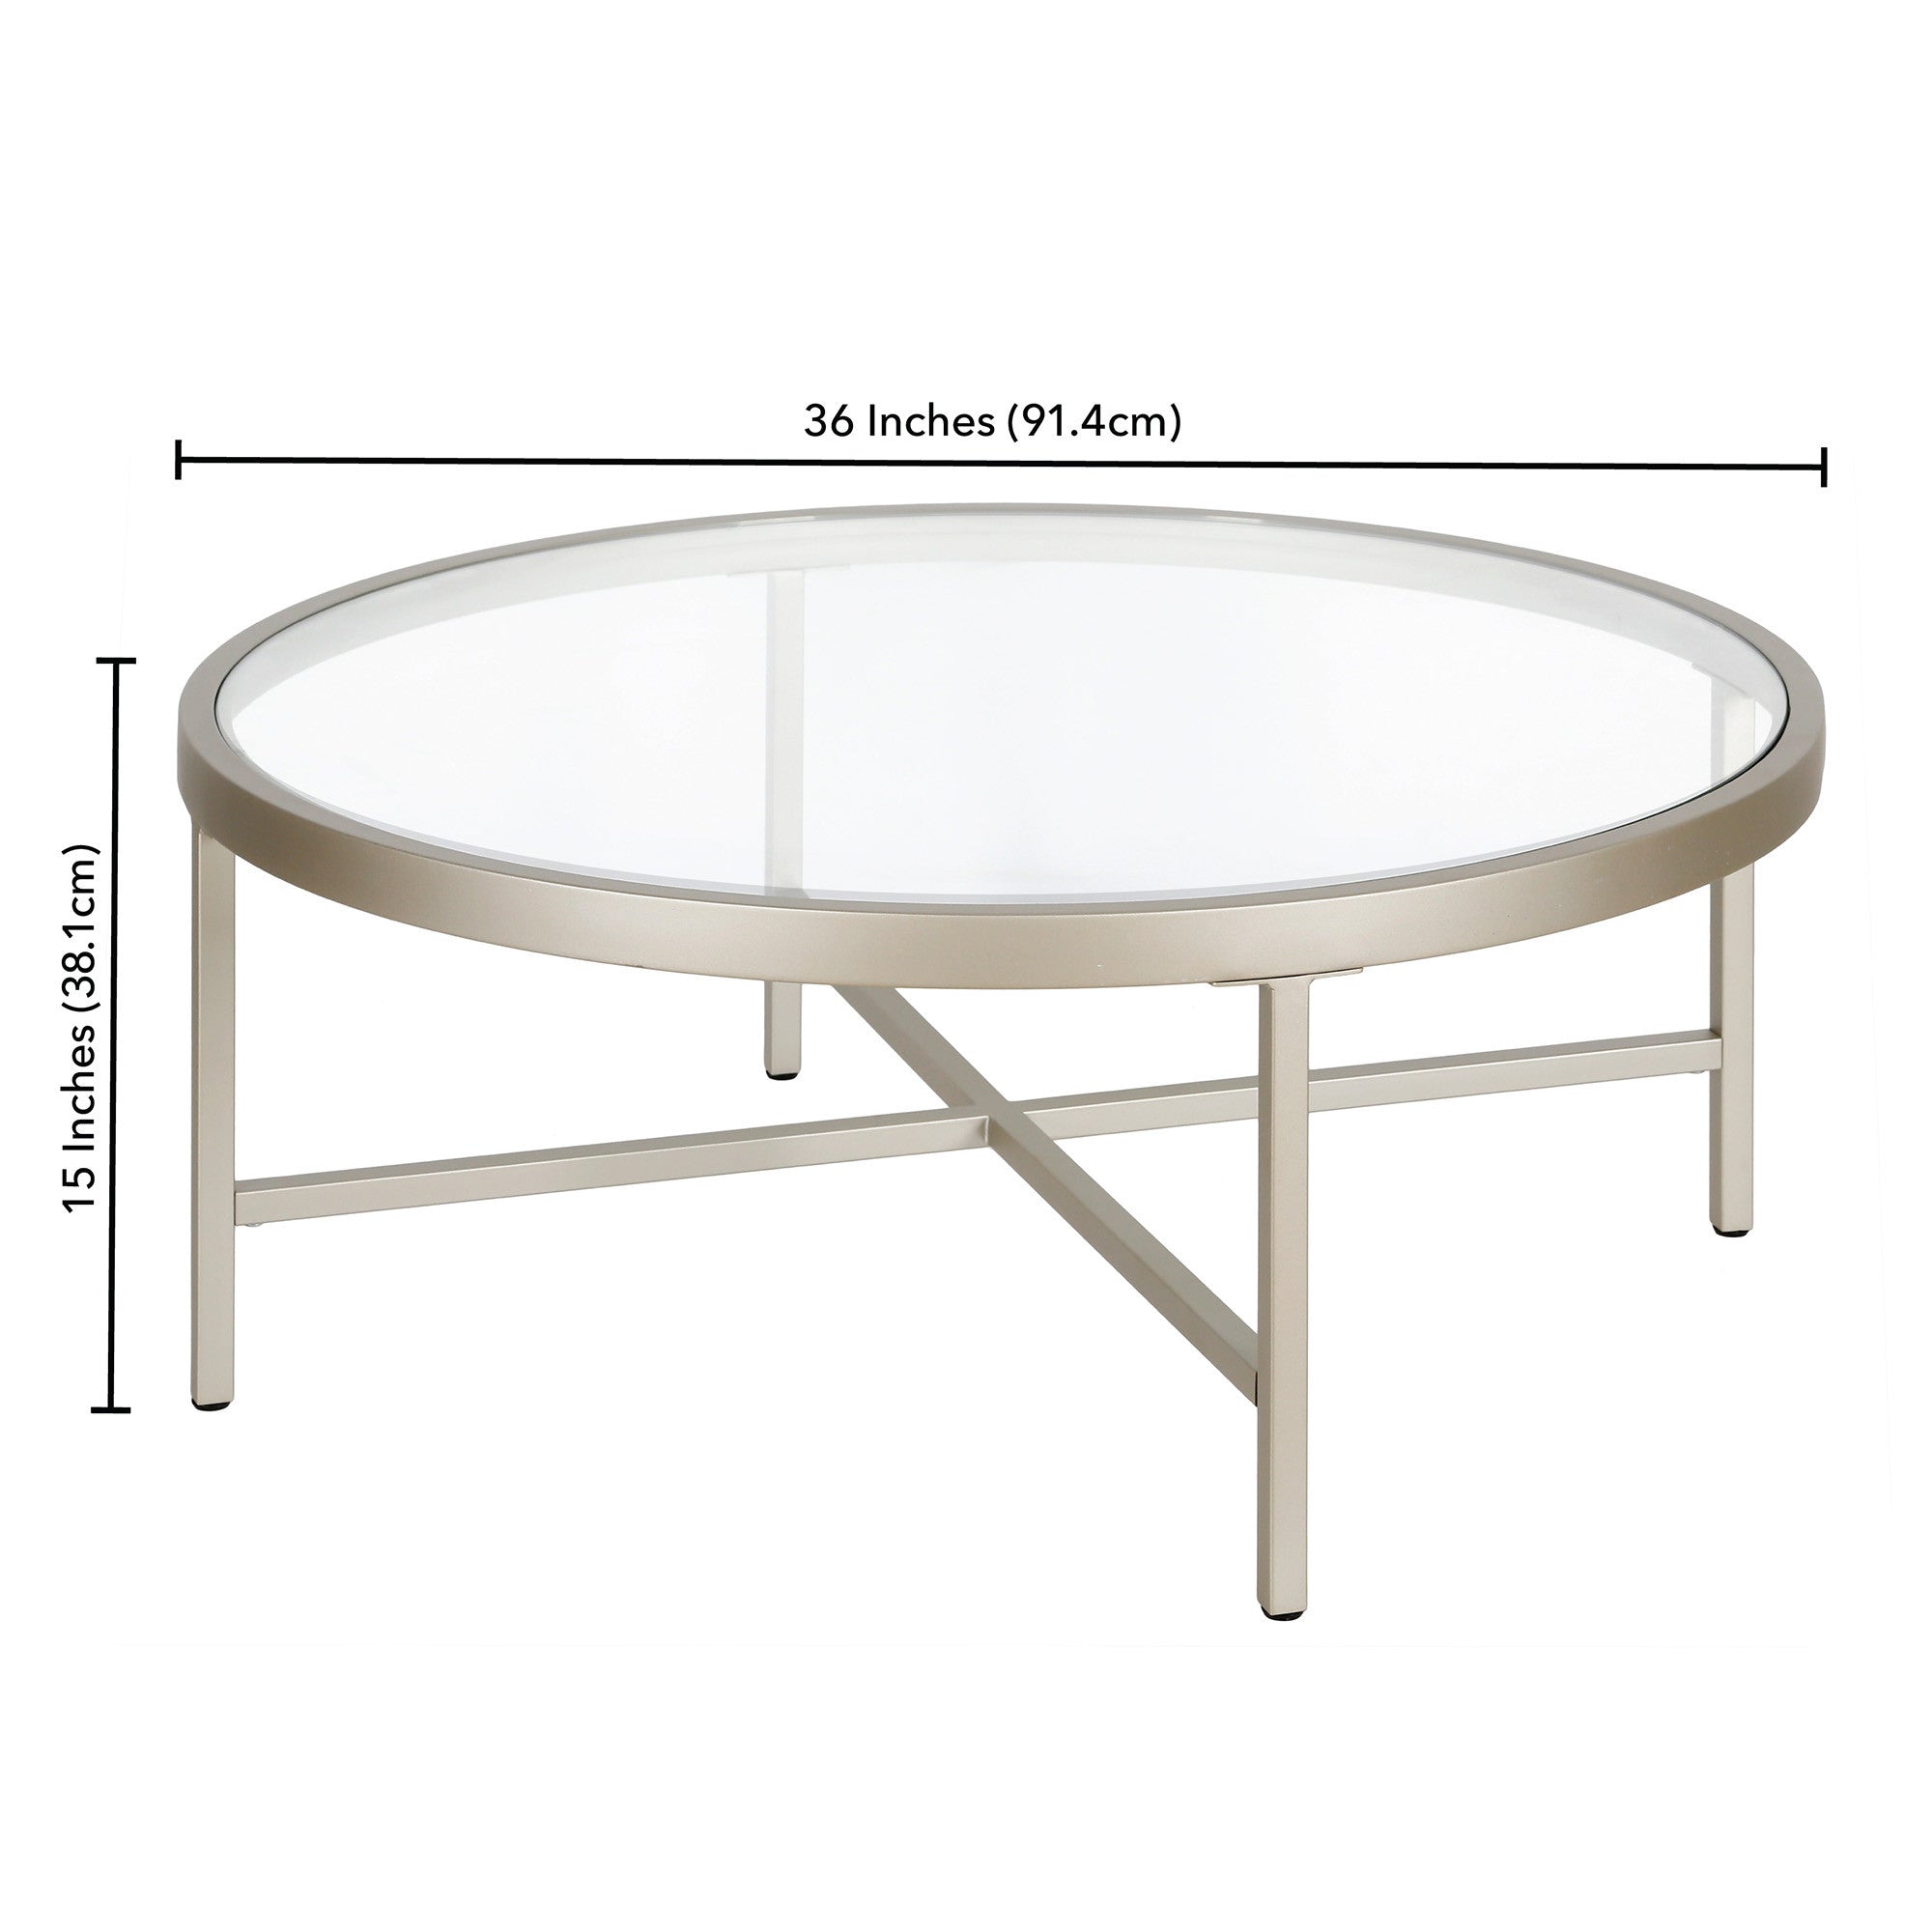 36" Silver Glass And Steel Round Coffee Table